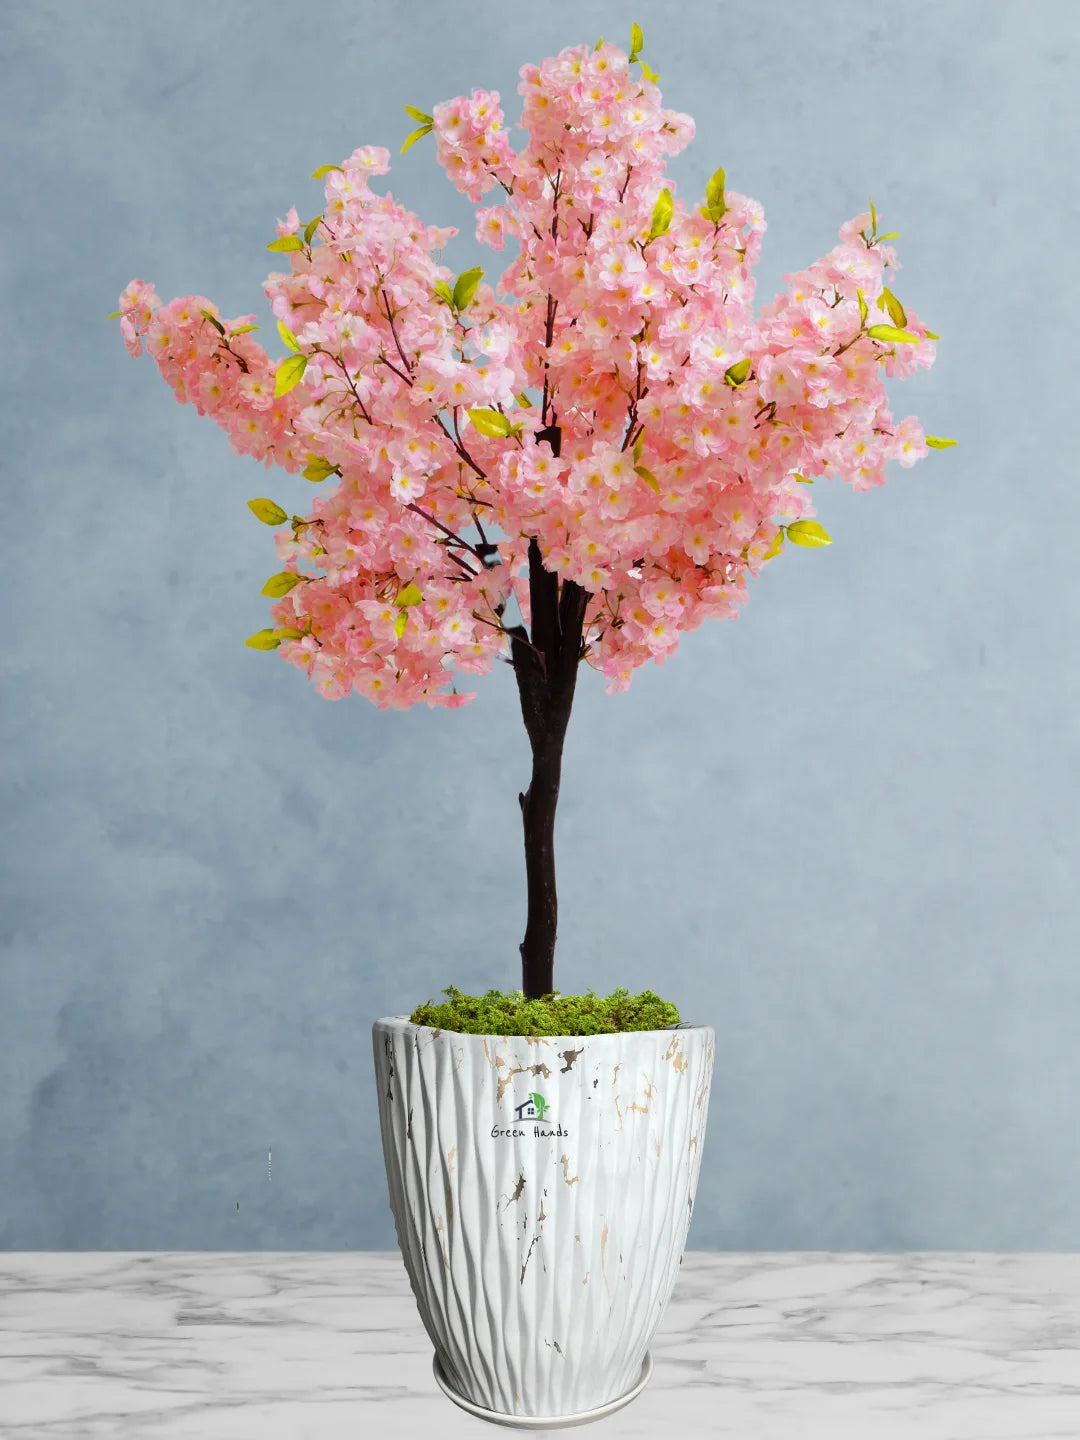 Exquisite Indoor Artificial Cherry Blossom Tree | XL Size 160-170cm | Perfect for Dubai, Abu Dhabi, UAE Homes & Offices